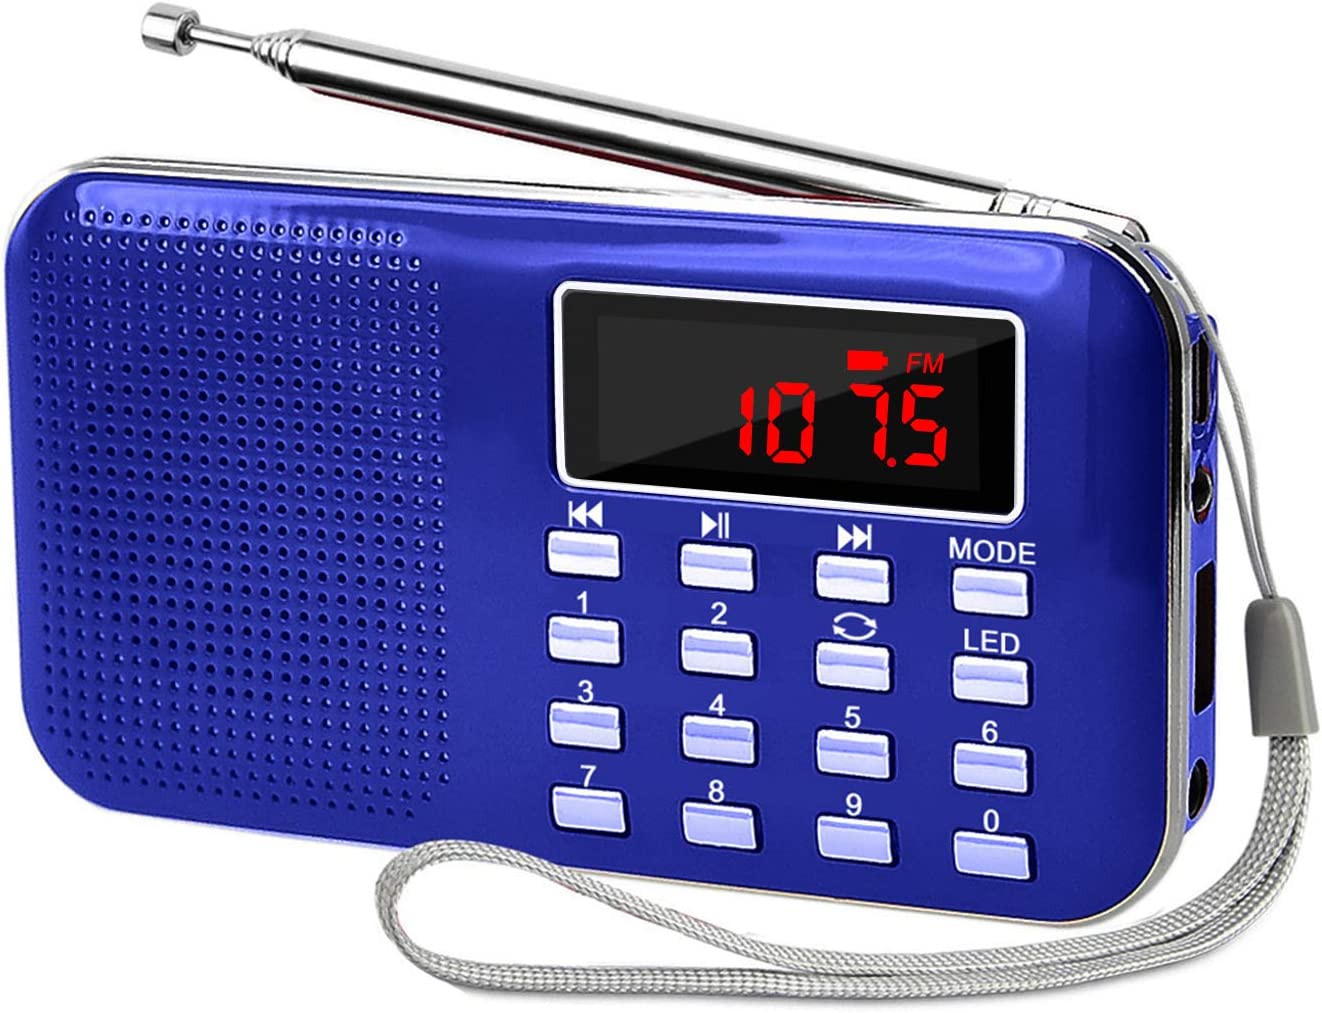 LEFON Mini Digital AM FM Radio Media Speaker MP3 Music Player Support TF Card/USB Disk with LED Screen Display and Emergency Flashlight Function (Blue-Upgraded)